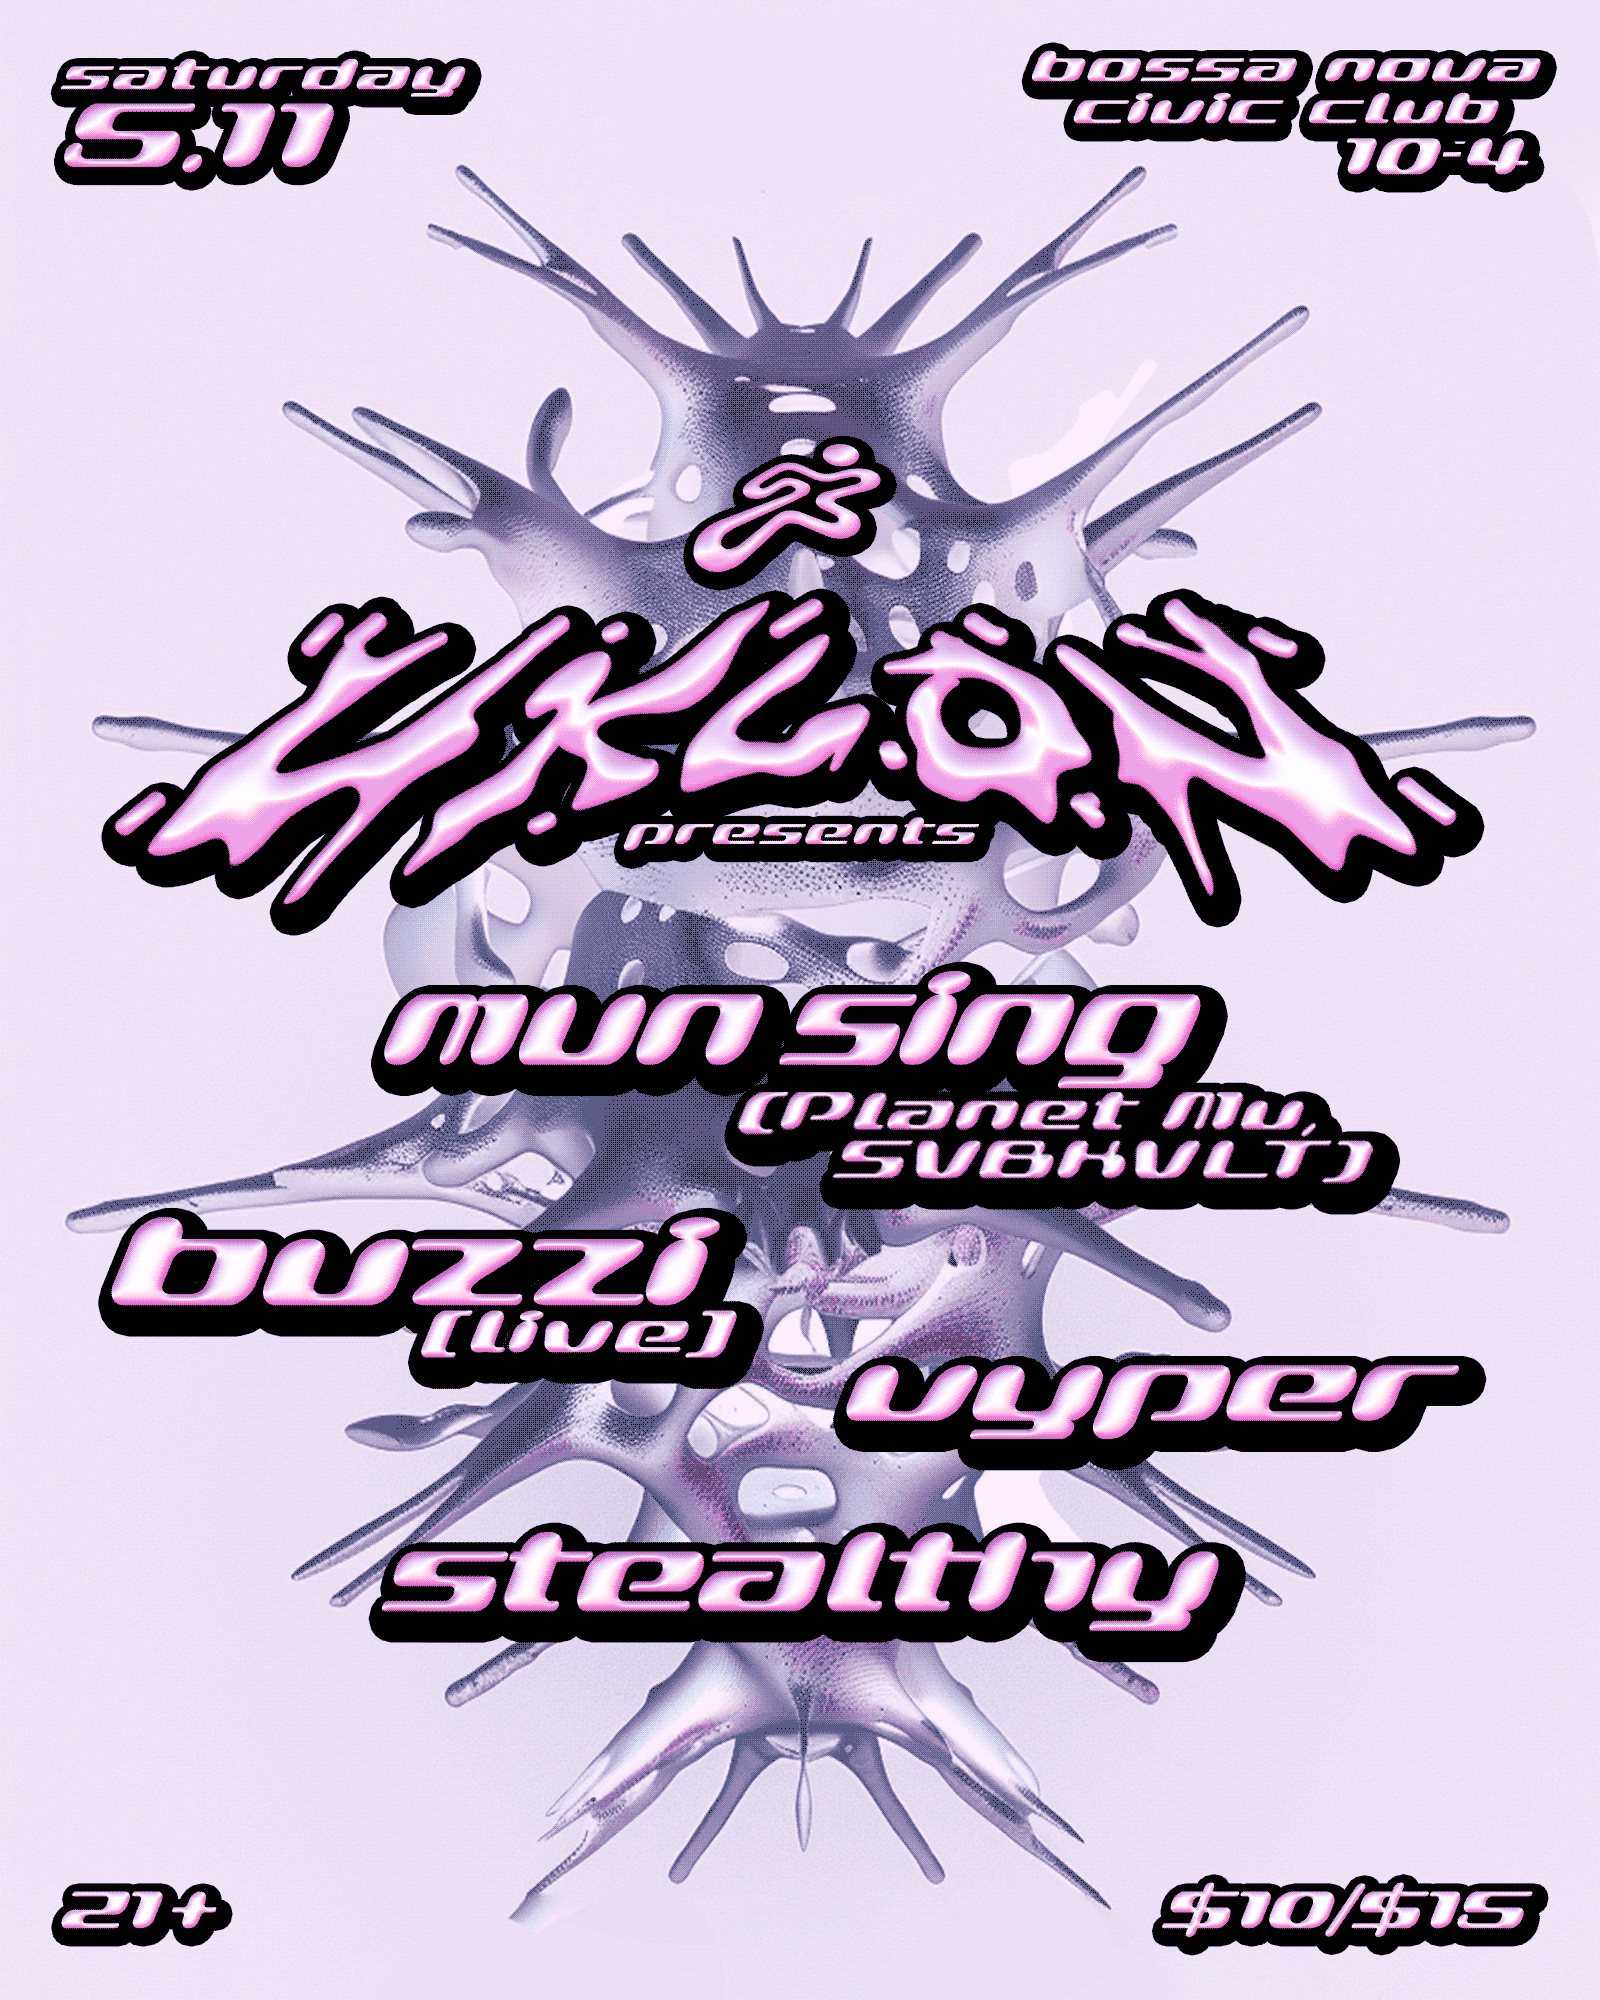 Uklon presents Mun Sing, Buzzi, Vyper and Stealthy